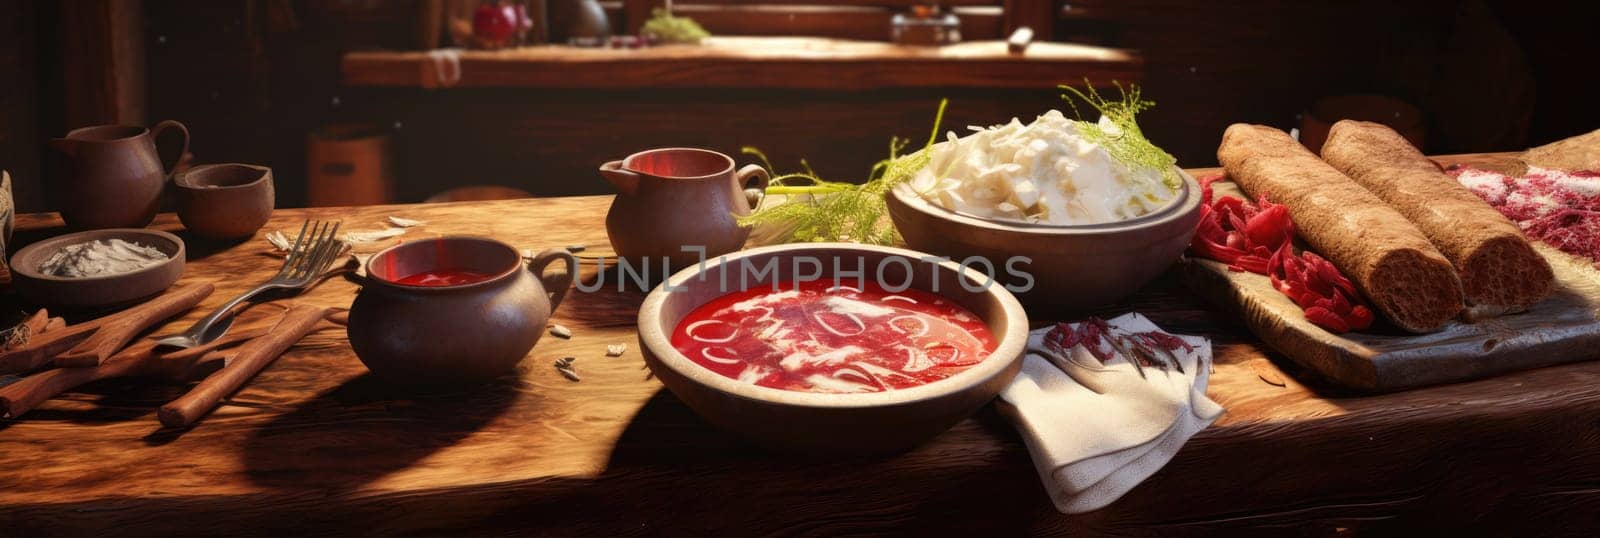 A wooden table displaying an assortment of bowls filled with freshly prepared and appetizing food.